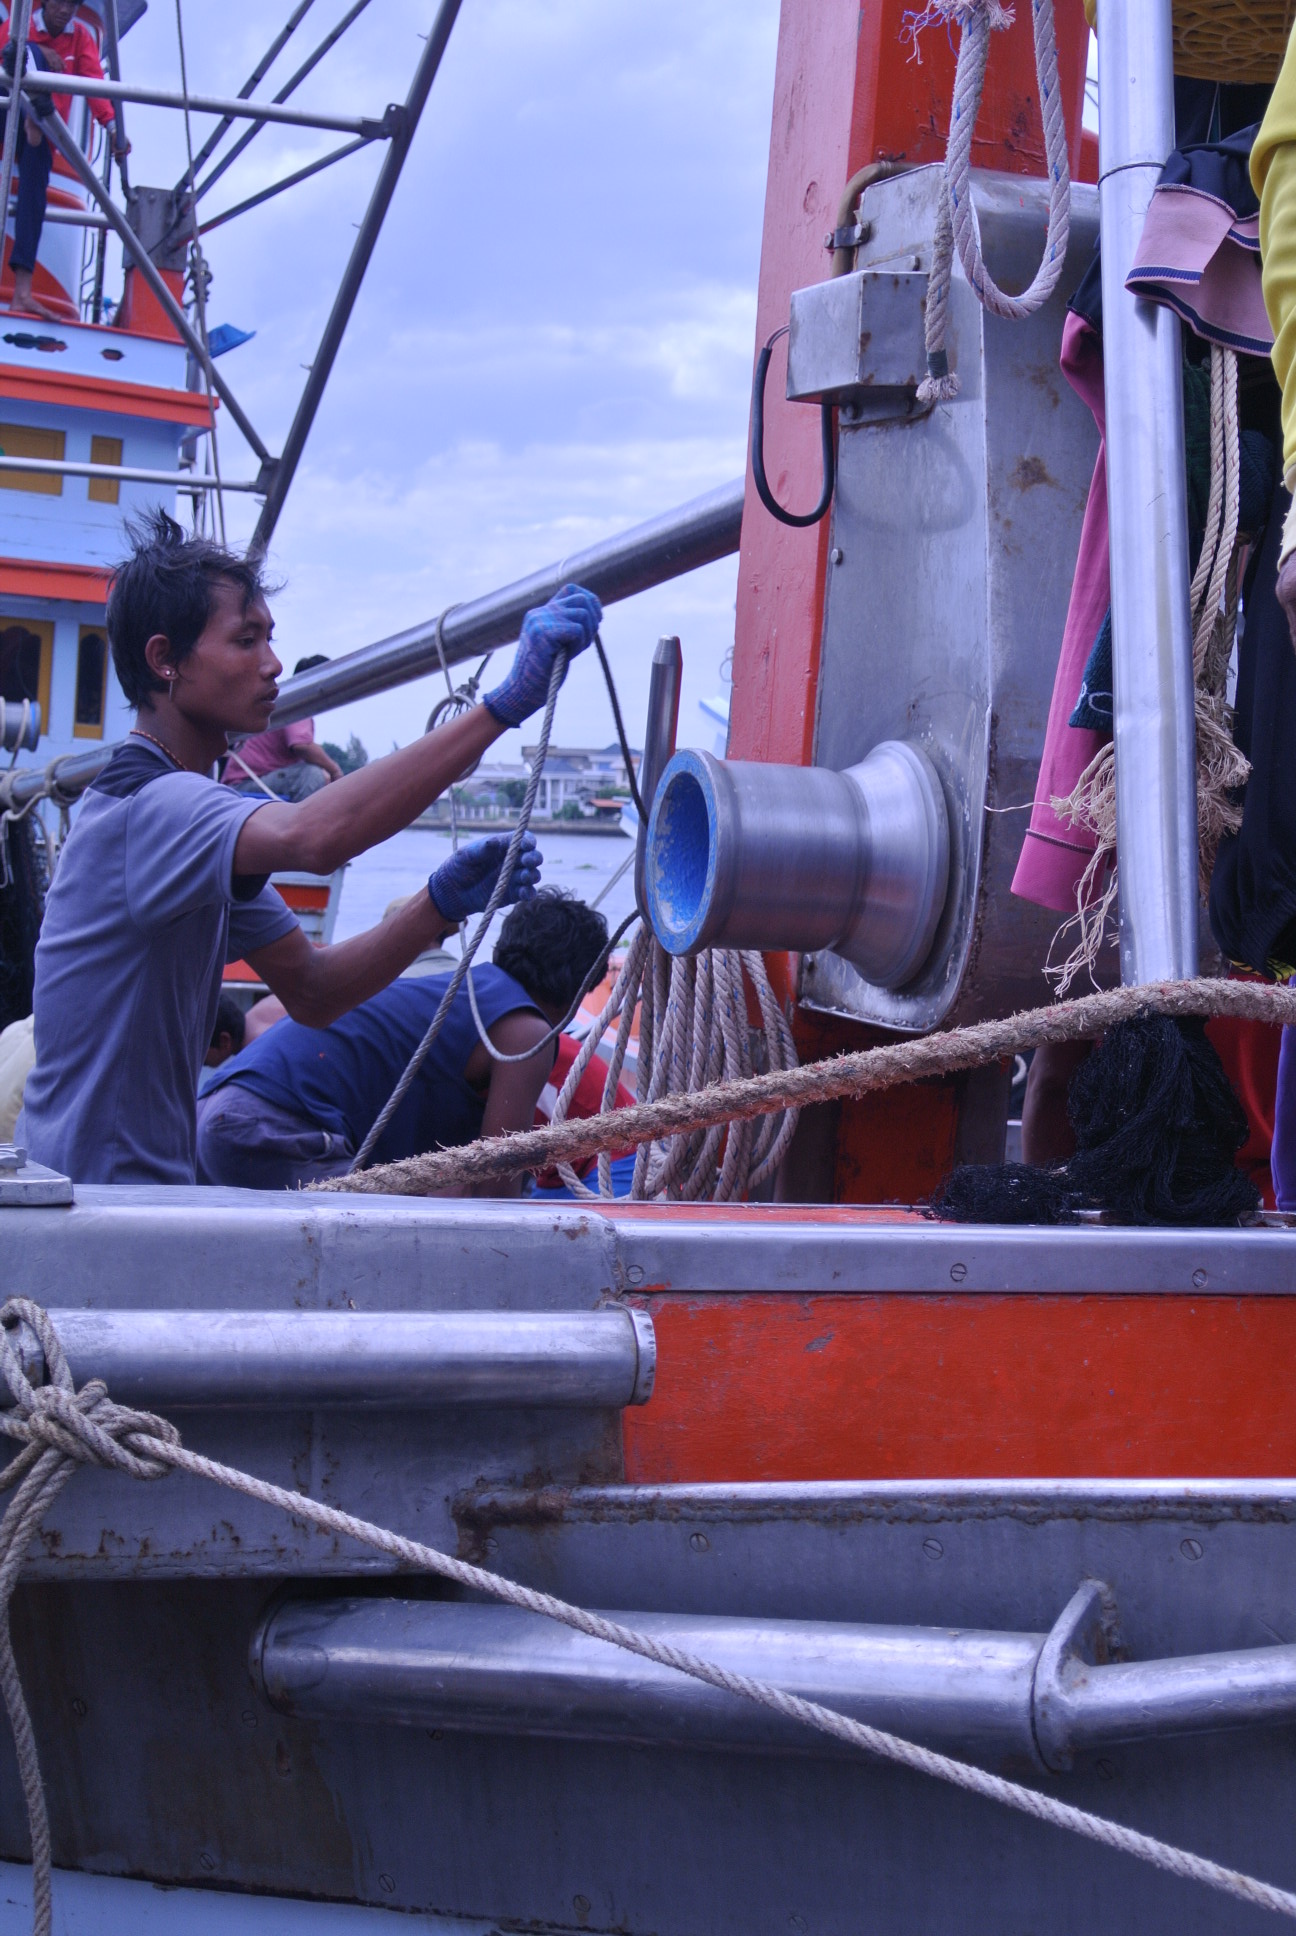 Migrant workers aboard a Thai boat at Samut Sakhon, Thailand